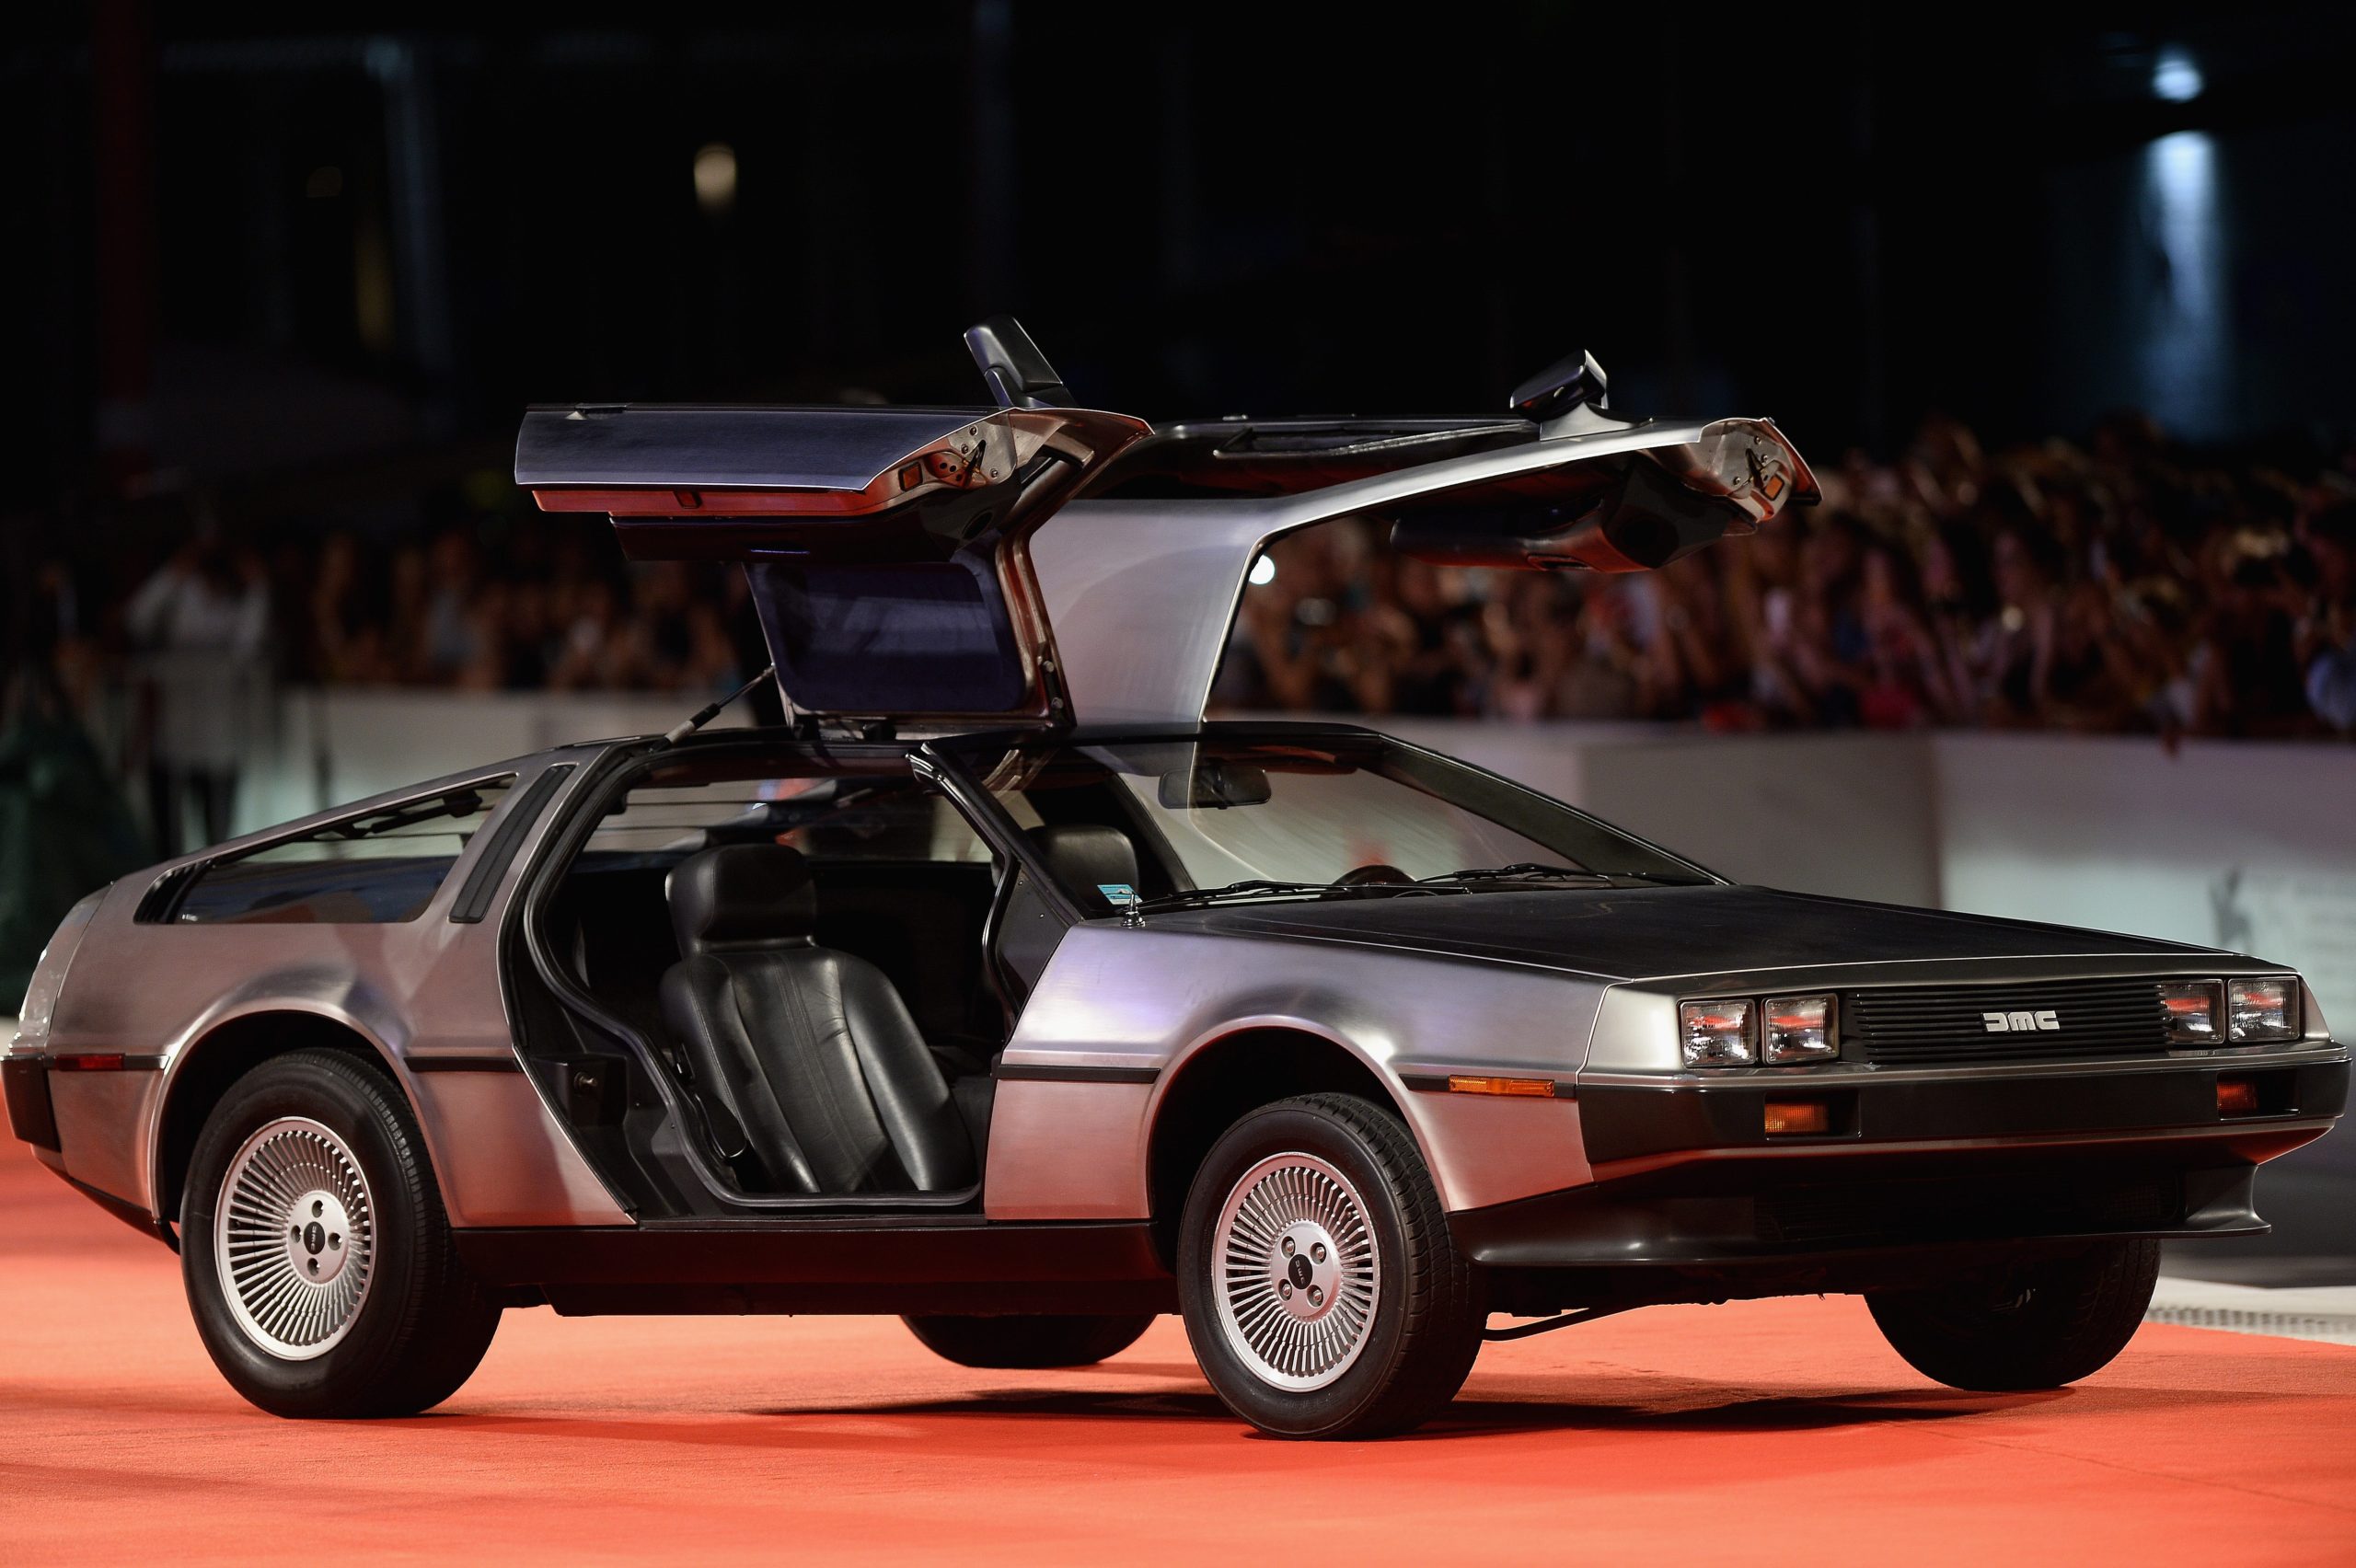 What’s Up With That DeLorean Revival From The Super Bowl?